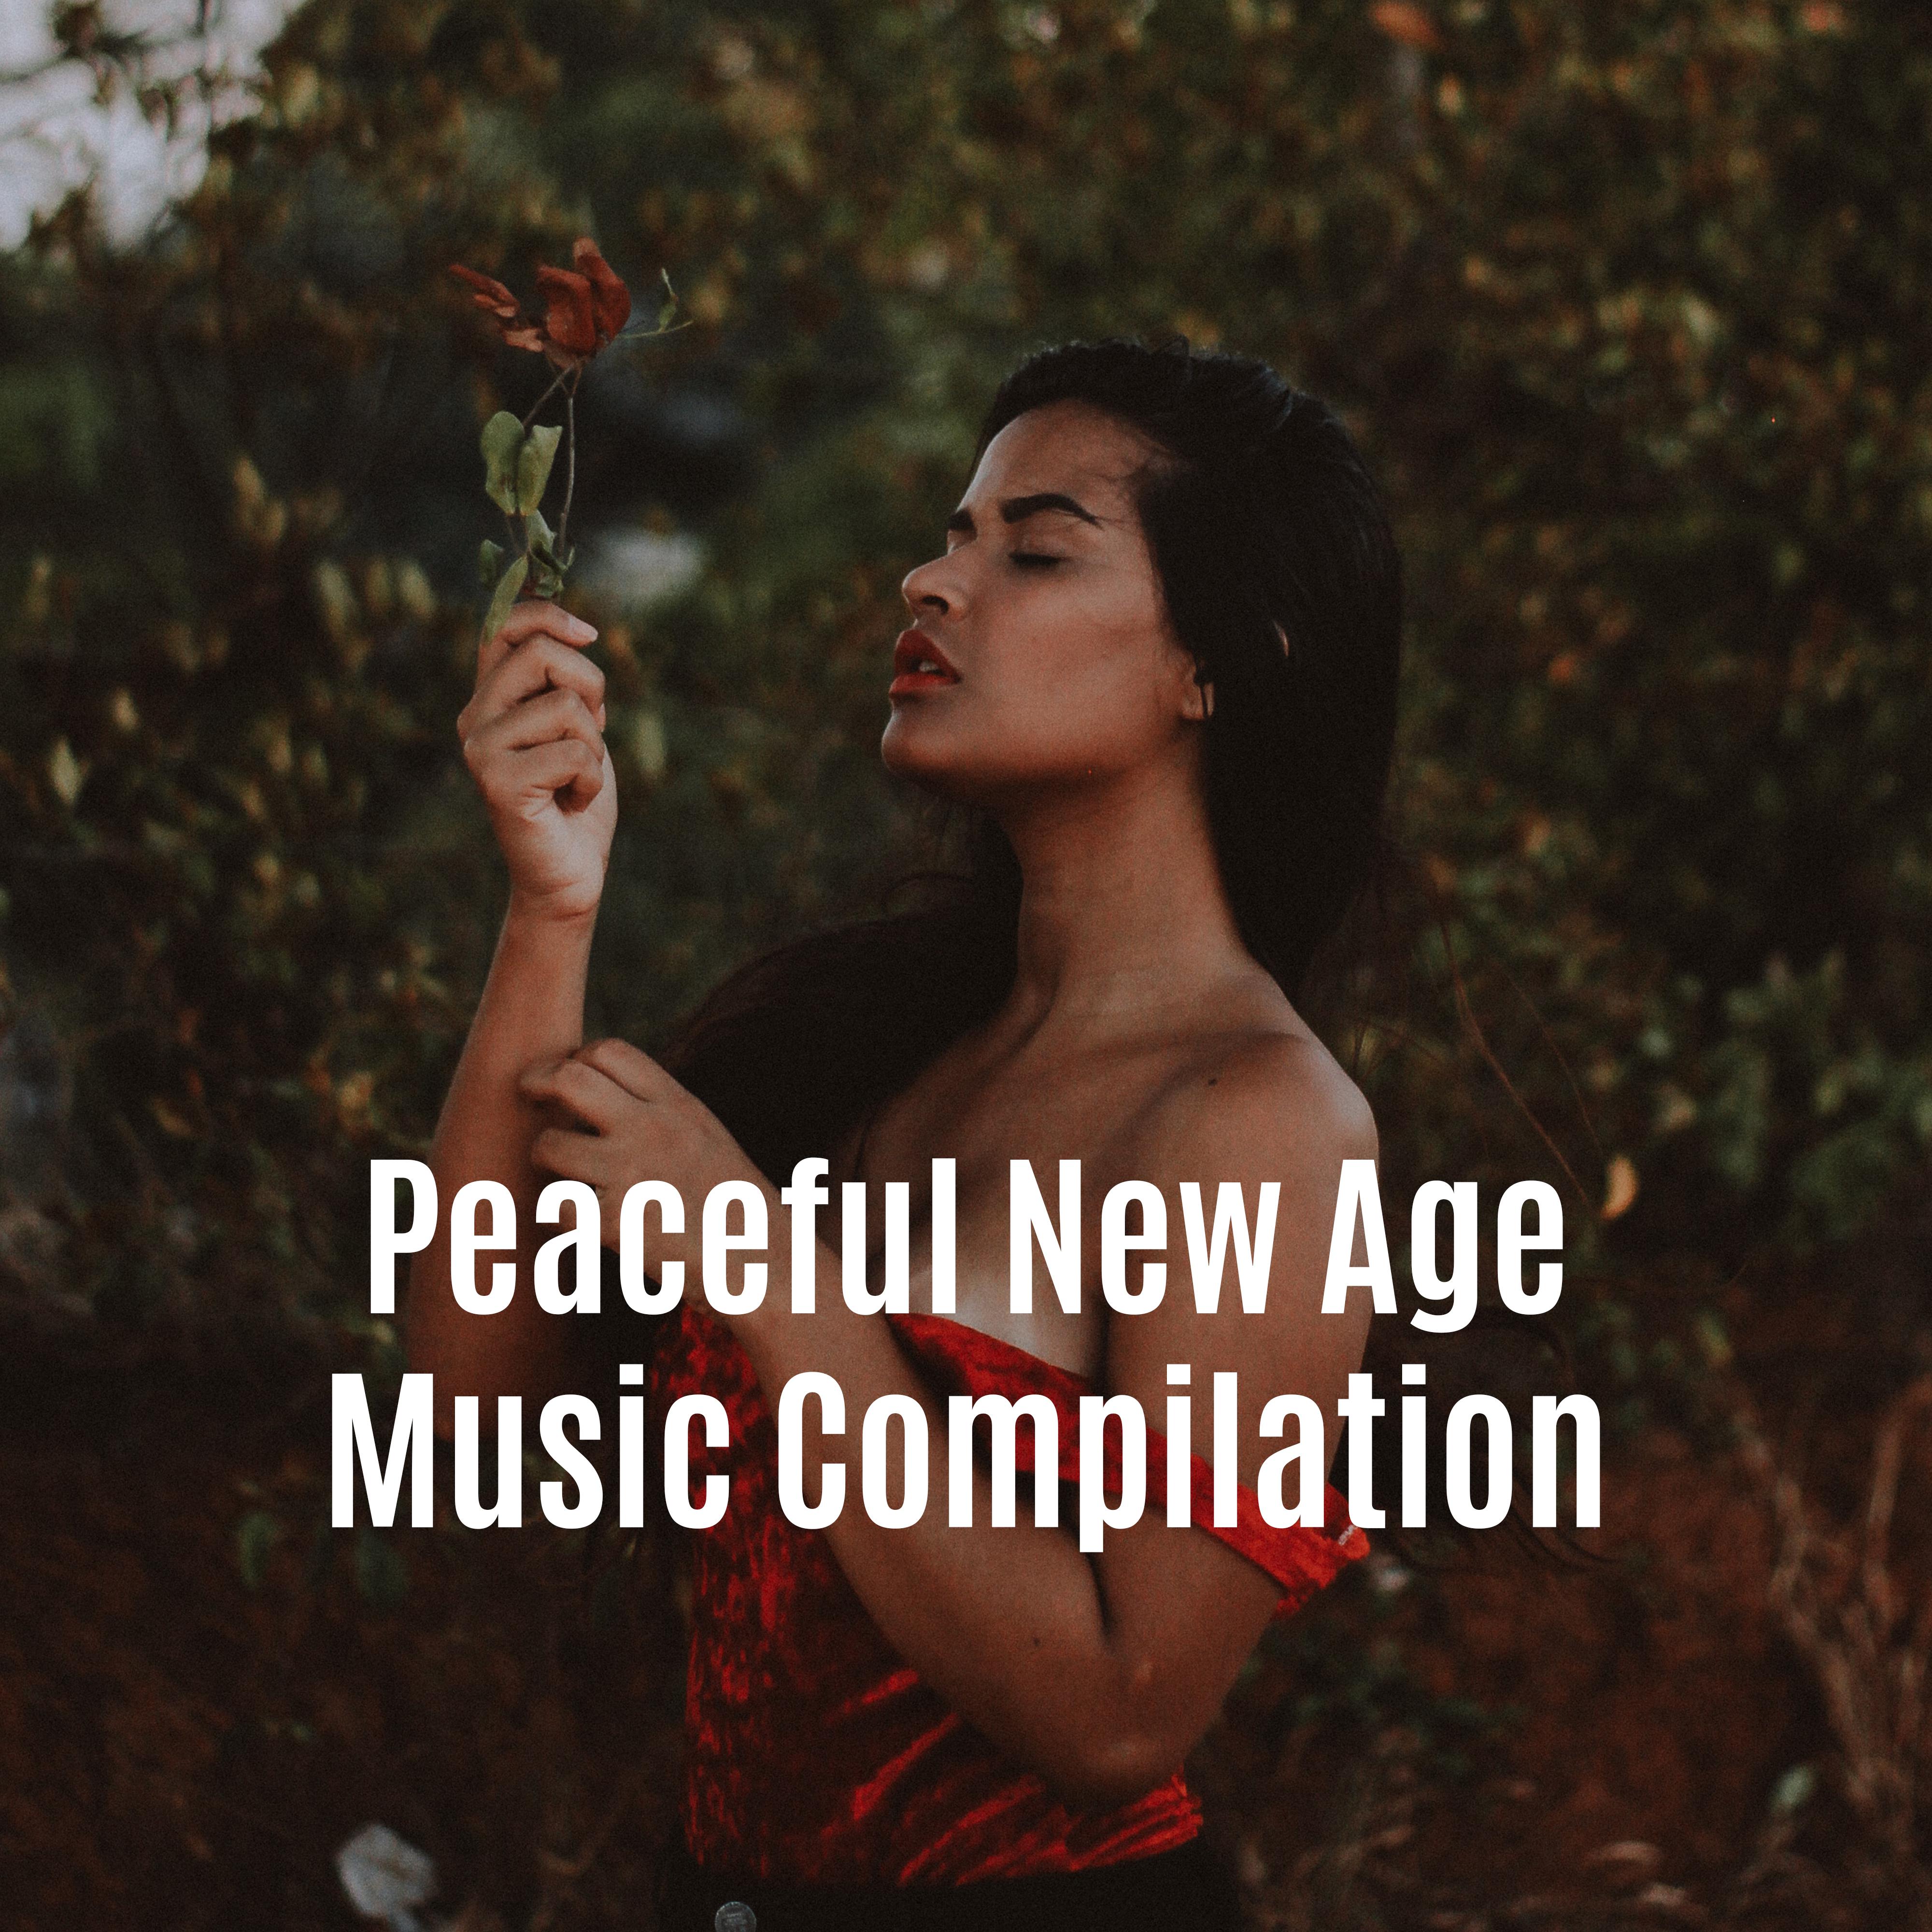 Peaceful New Age Music Compilation: 15 Tracks Soothingly Affecting the Mood and General Well Being, Bringing Peace, Self-Control, Inner Harmony and Balance